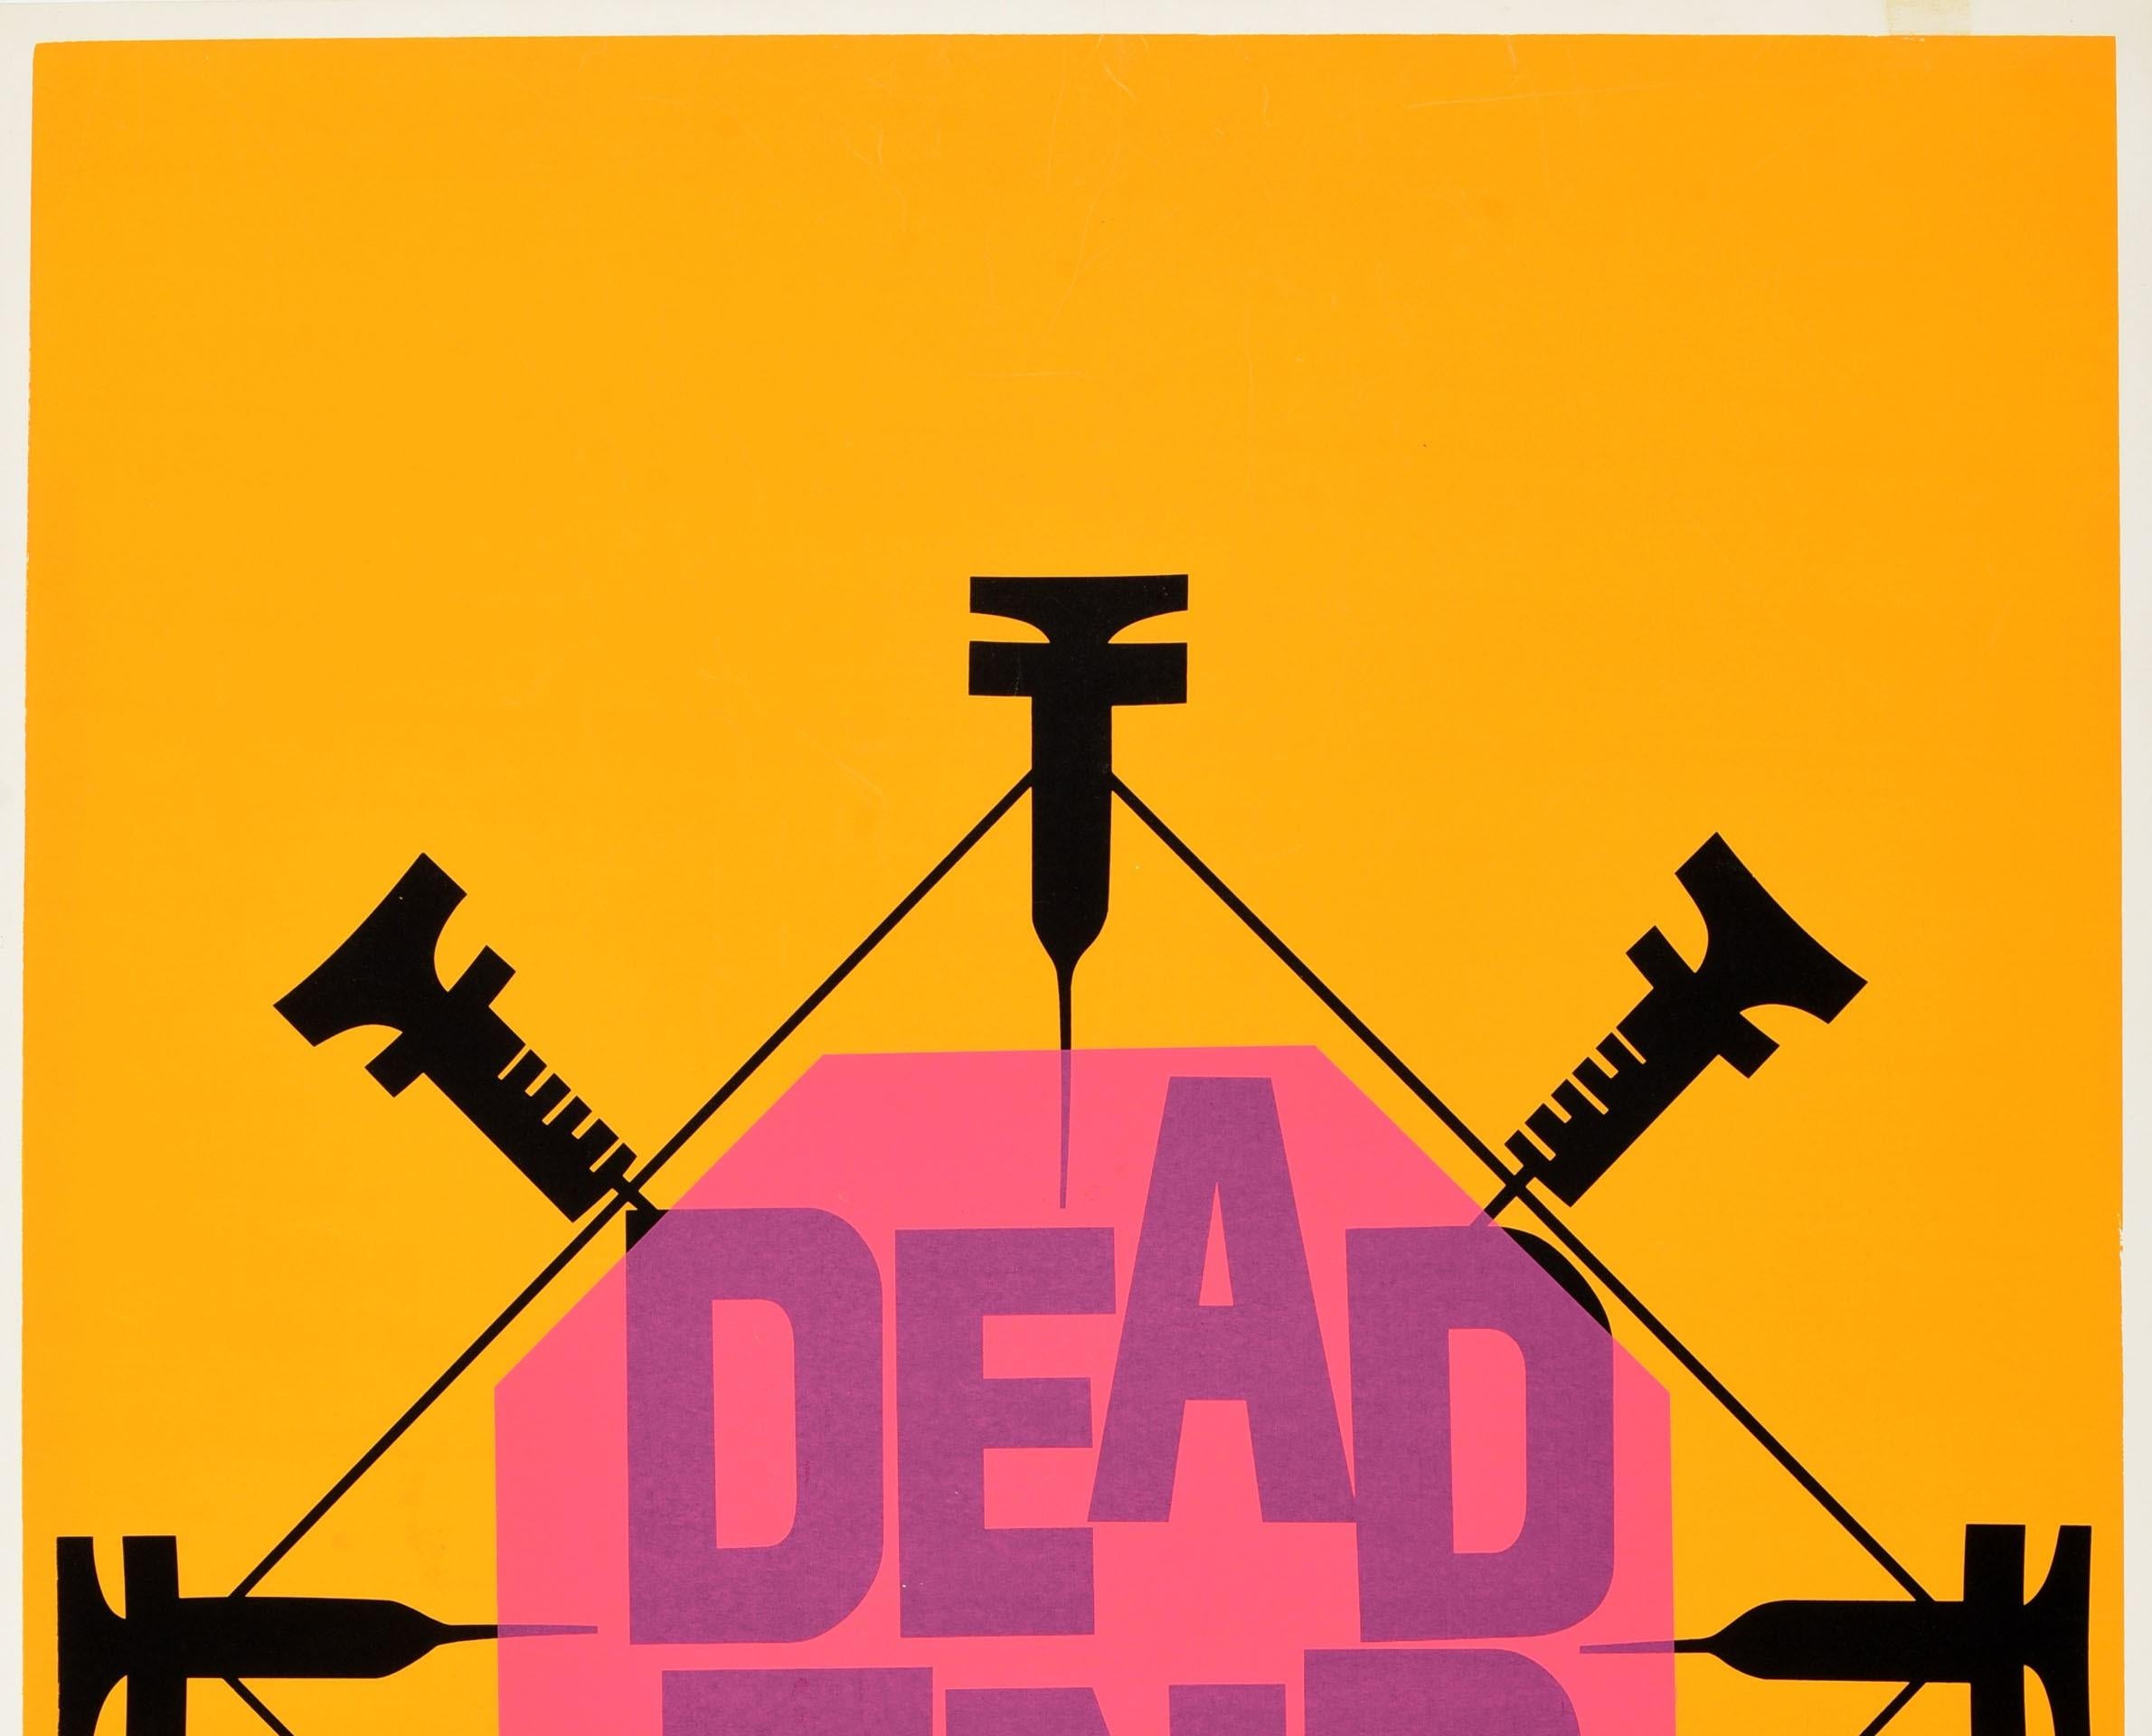 Original vintage anti-drug public health safety poster featuring a dynamic graphic design showing hypodermic needles pointing towards a pink sign in the centre reading Dead End against a yellow background. Created as a Public Service by the Franklin